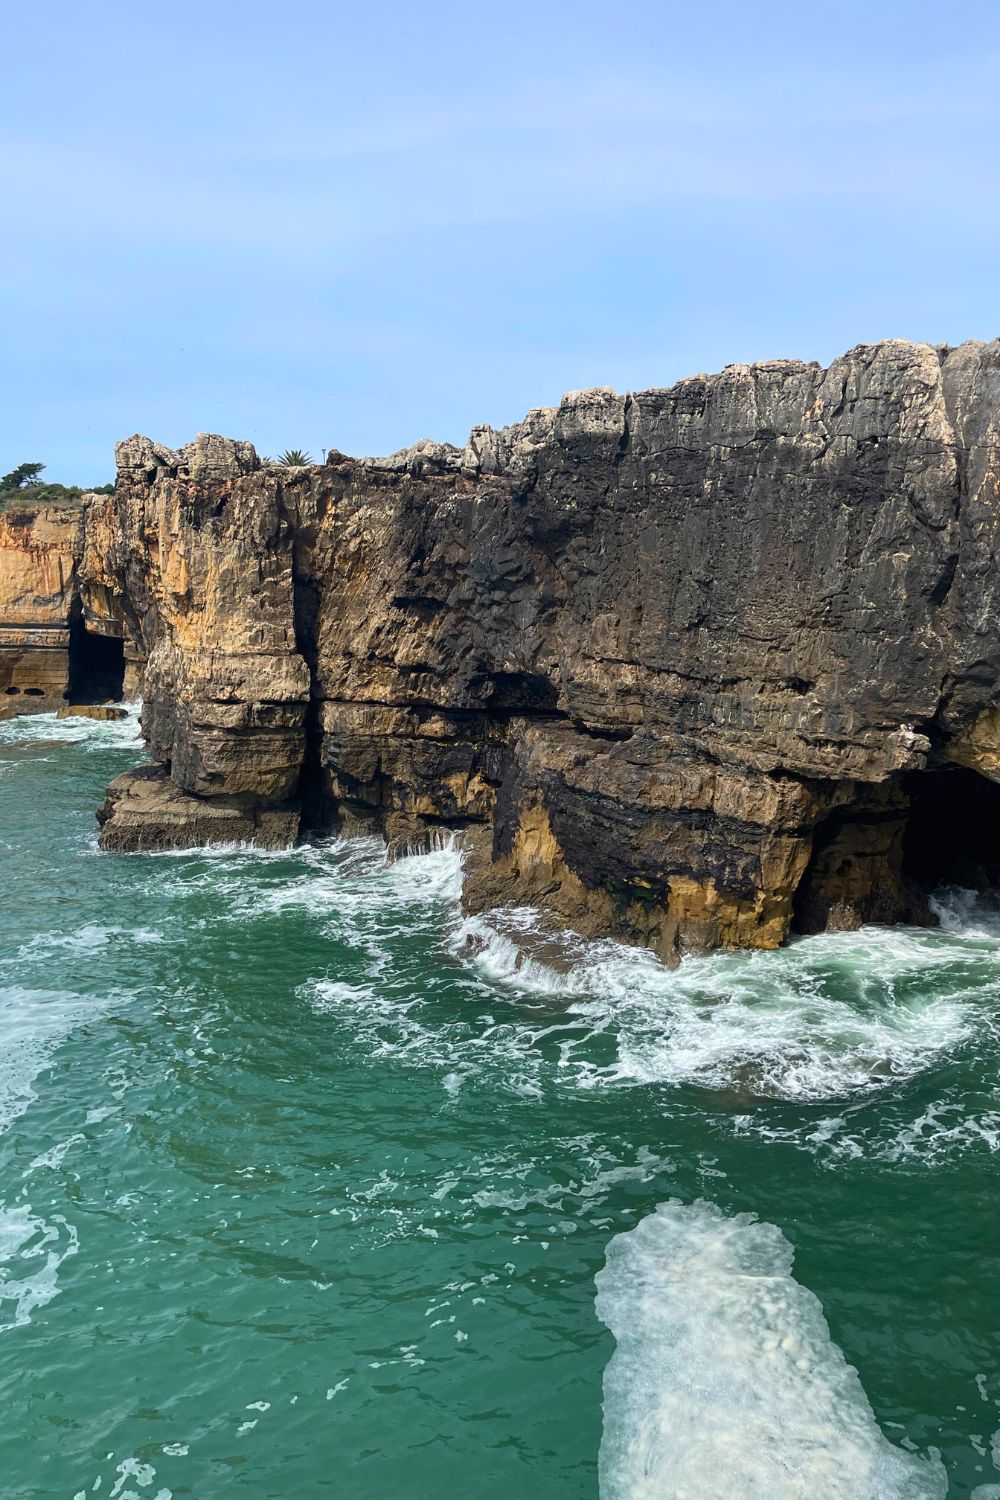 A closer perspective of Hell's Mouth (Boca do Inferno) in Cascais, showing the dramatic rock structures and the powerful waves crashing into the caverns. The clear emerald waters and the stratified rock faces create a majestic natural spectacle, highlighting the raw beauty of Portugal's coastline.